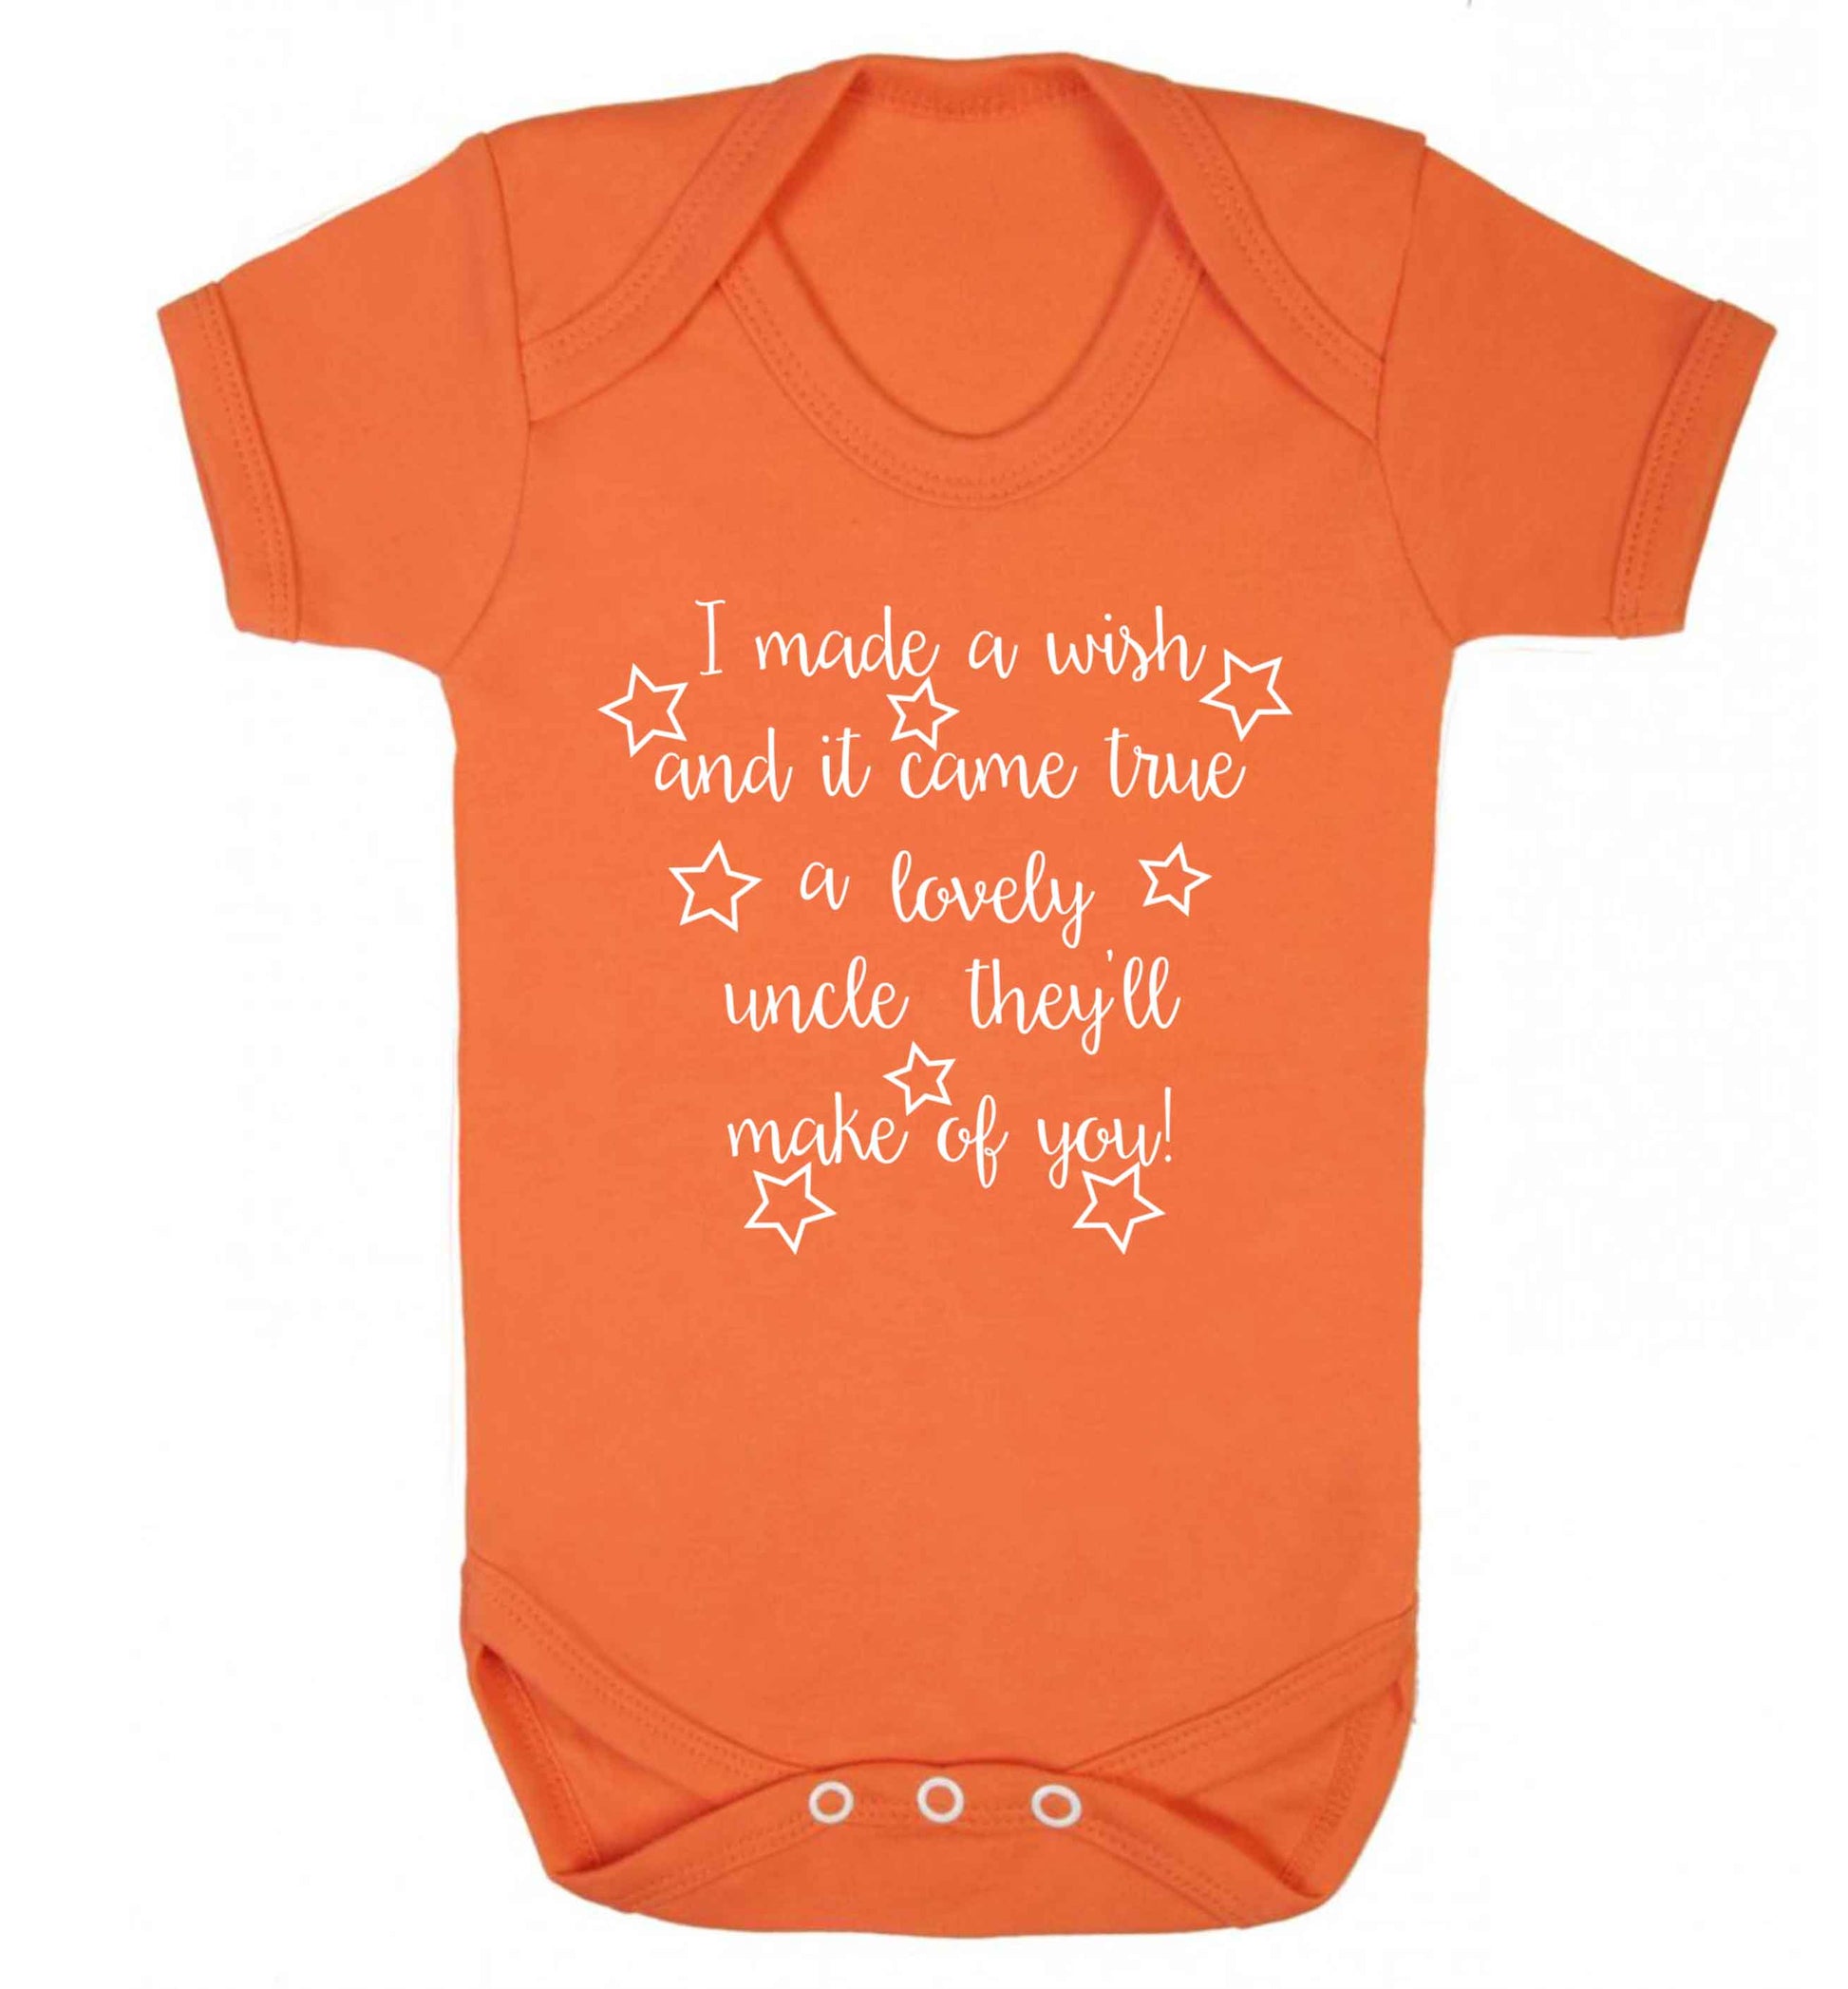 I made a wish and it came true a lovely uncle they'll make of you! Baby Vest orange 18-24 months